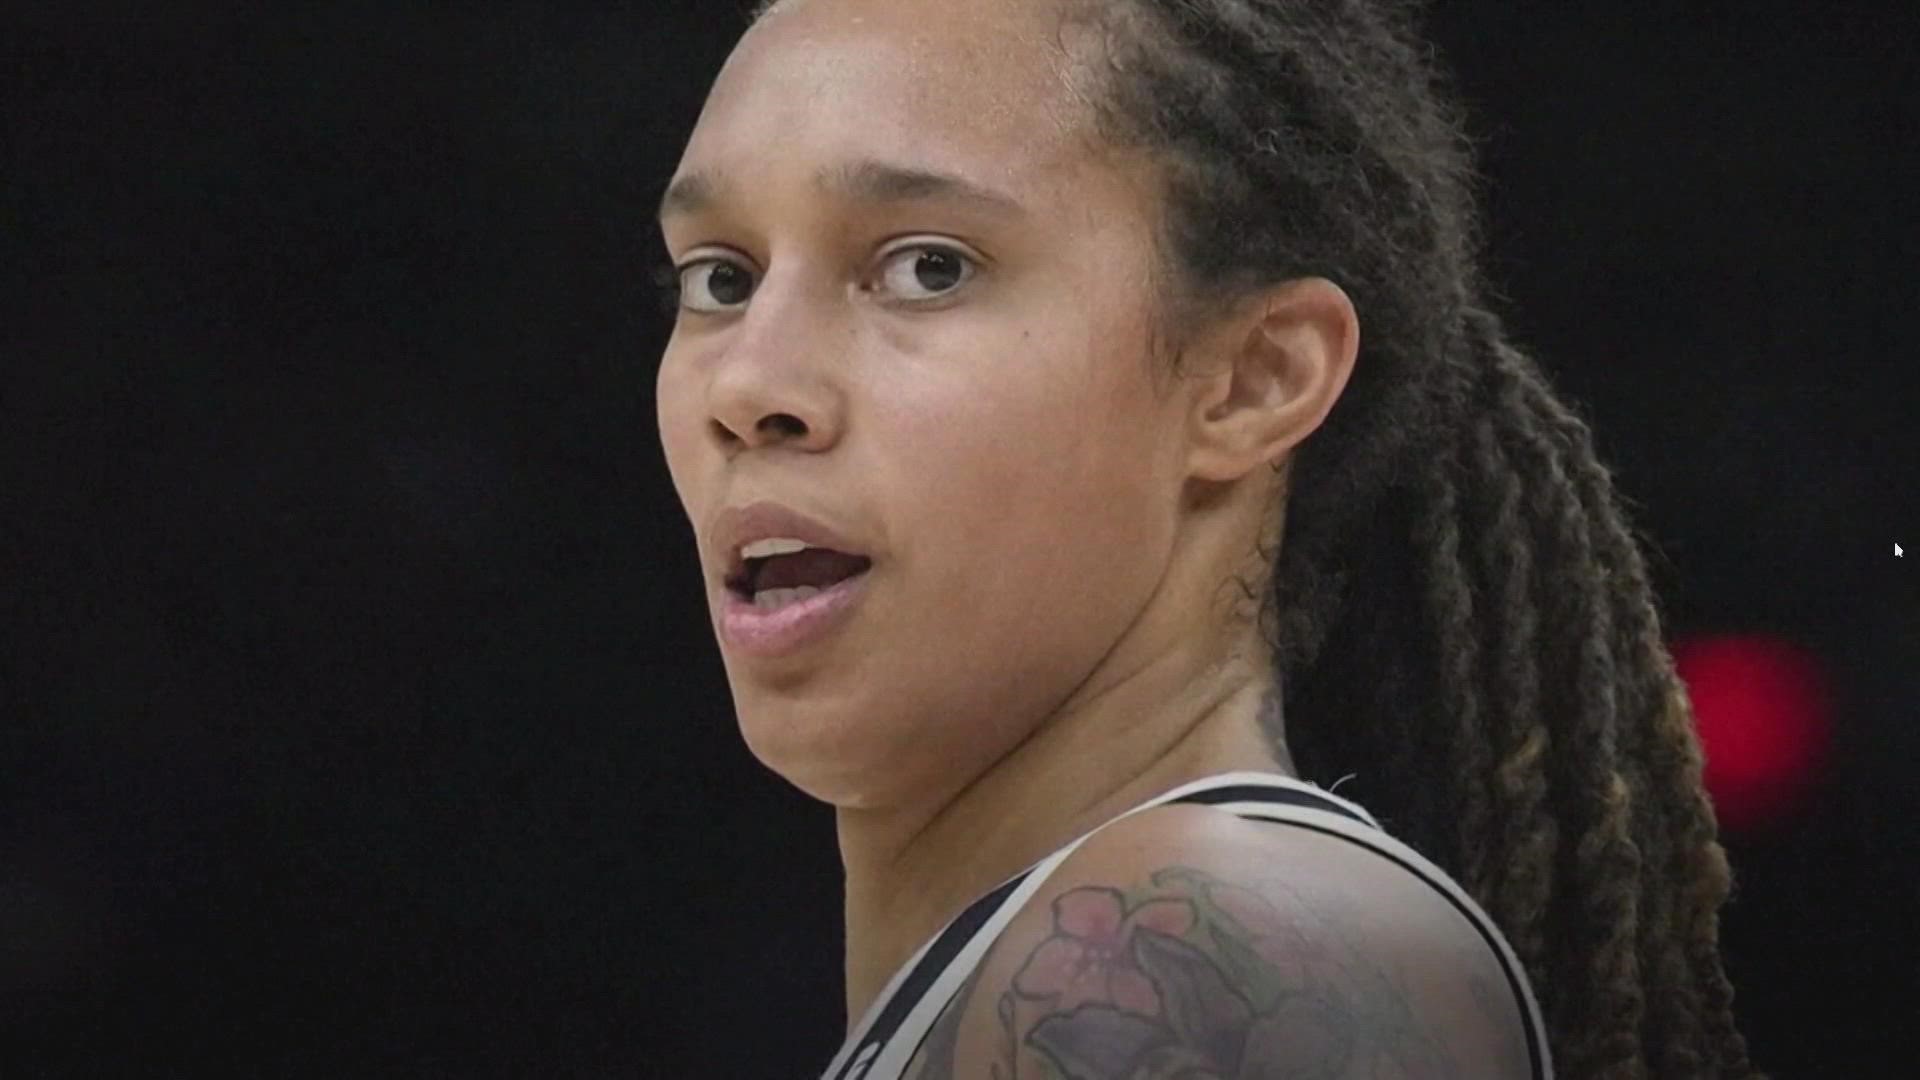 Brittney Griner, 31, has been held in Russia since February on accusations of drug smuggling and has been officially classified as "wrongfully detained."